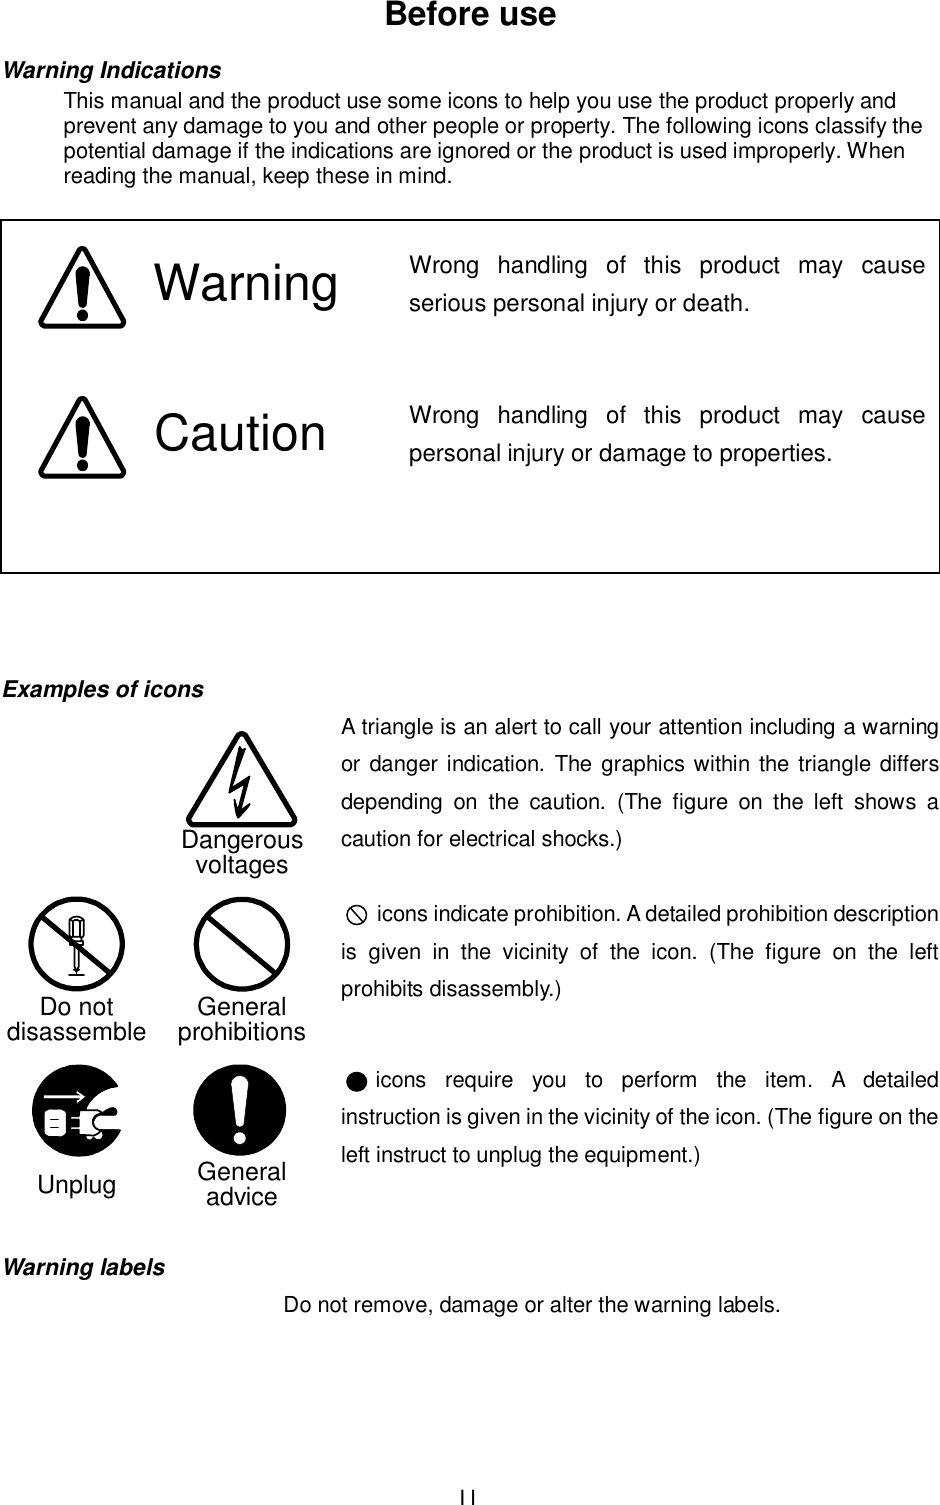  II Before use Warning Indications This manual and the product use some icons to help you use the product properly and prevent any damage to you and other people or property. The following icons classify the potential damage if the indications are ignored or the product is used improperly. When reading the manual, keep these in mind.     Examples of icons A triangle is an alert to call your attention including a warning or danger indication.  The graphics within the triangle differs depending  on  the  caution.  (The  figure  on  the  left  shows  a caution for electrical shocks.)      icons indicate prohibition. A detailed prohibition description is  given  in  the  vicinity  of  the  icon.  (The  figure  on  the  left prohibits disassembly.)           icons  require  you  to  perform  the  item.  A  detailed instruction is given in the vicinity of the icon. (The figure on the left instruct to unplug the equipment.)   Warning labels Do not remove, damage or alter the warning labels.    Warning      Caution  Wrong  handling  of  this  product  may  causeserious personal injury or death.   Wrong  handling  of  this  product  may  causepersonal injury or damage to properties.  DangerousvoltagesGeneralprohibitionsGeneraladviceDo notdisassembleUnplug